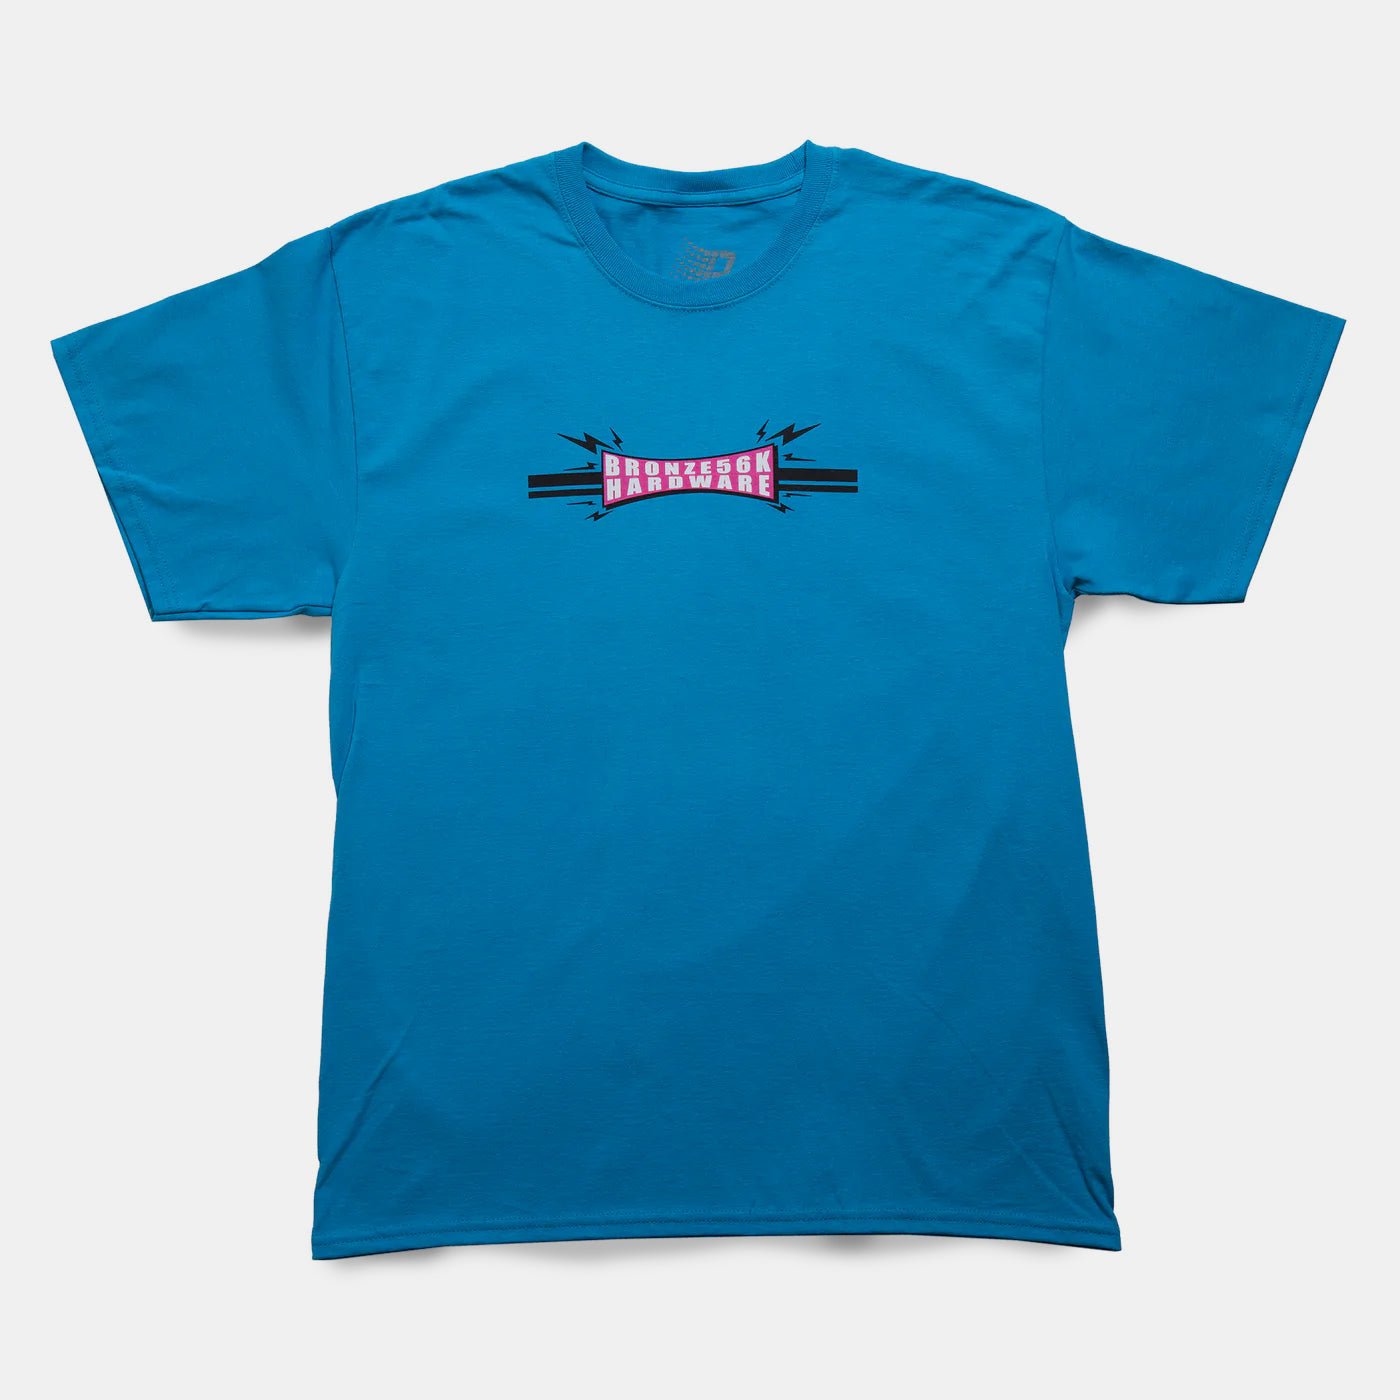 Bronze 56K - Non Approved Tee - Turquoise - Parliamentskateshop